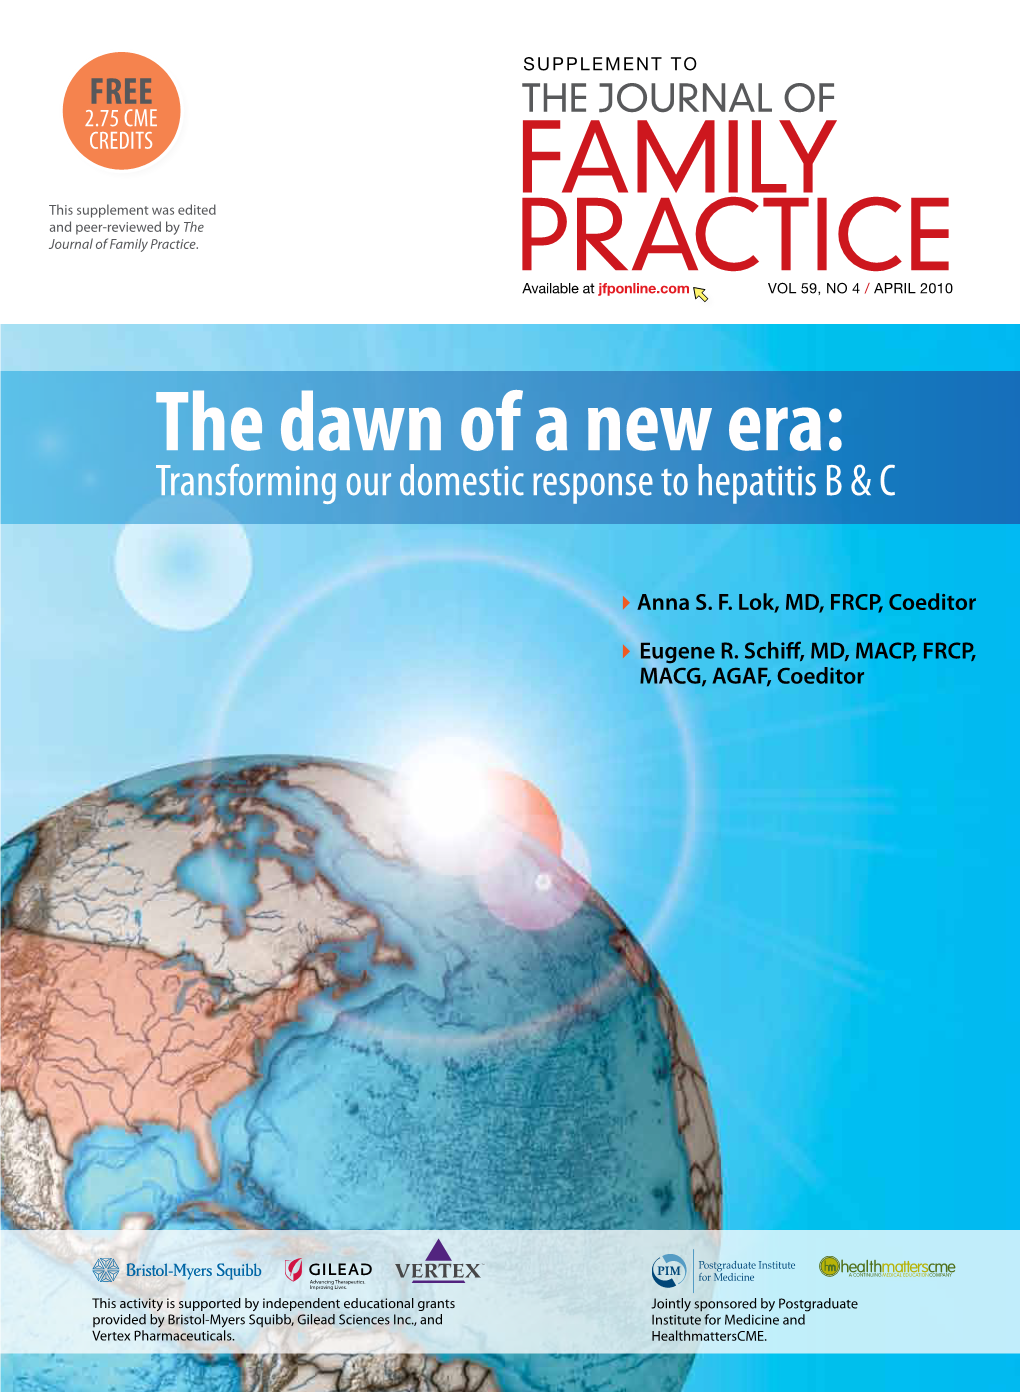 The Dawn of a New Era: Transforming Our Domestic Response to Hepatitis B & C